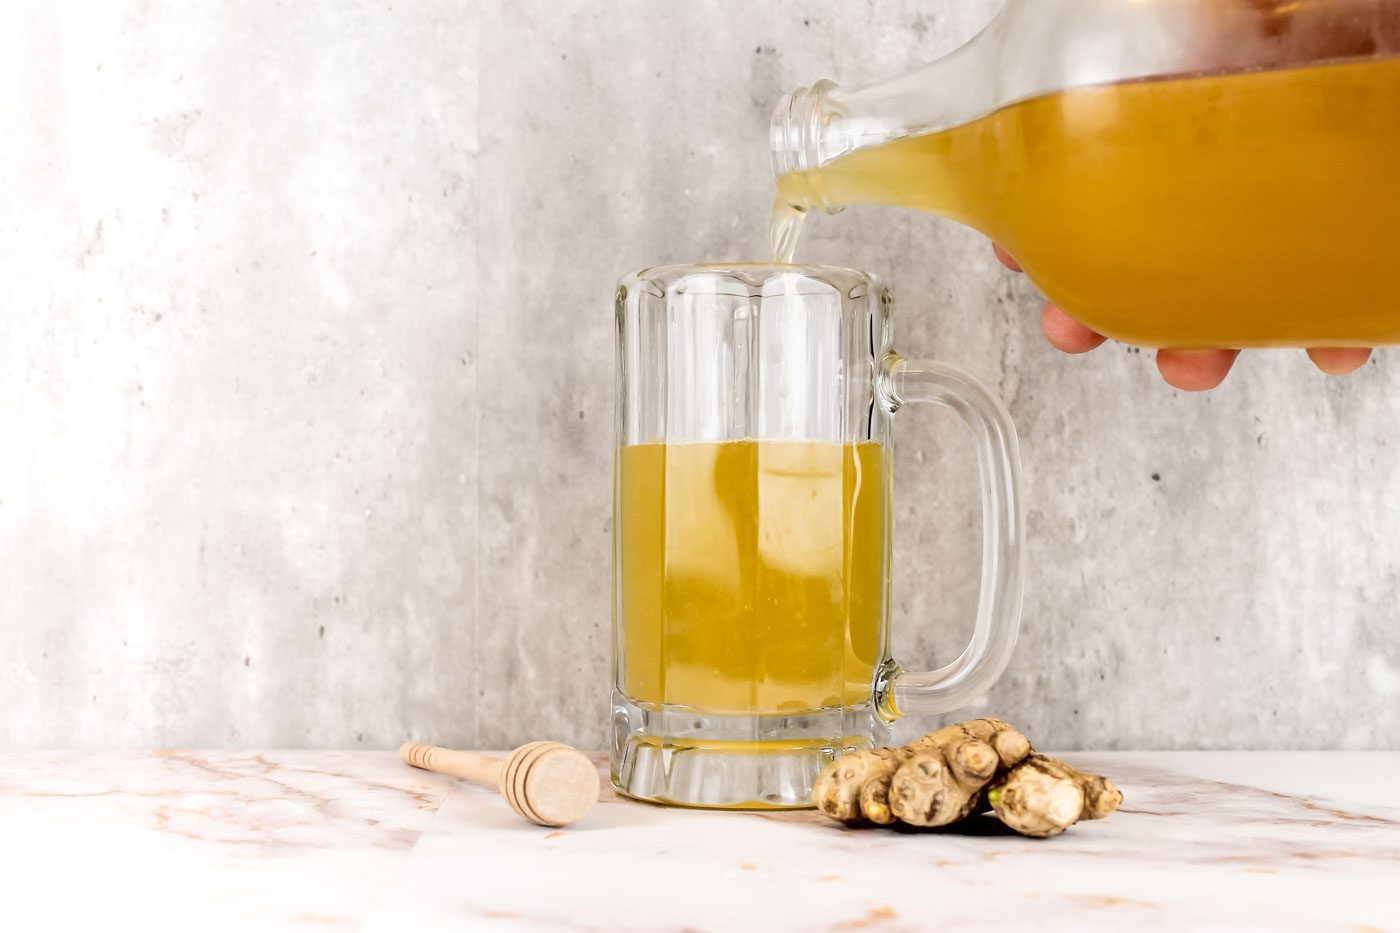 bottle of fermented ginger ale slowing pouring into a glass mug